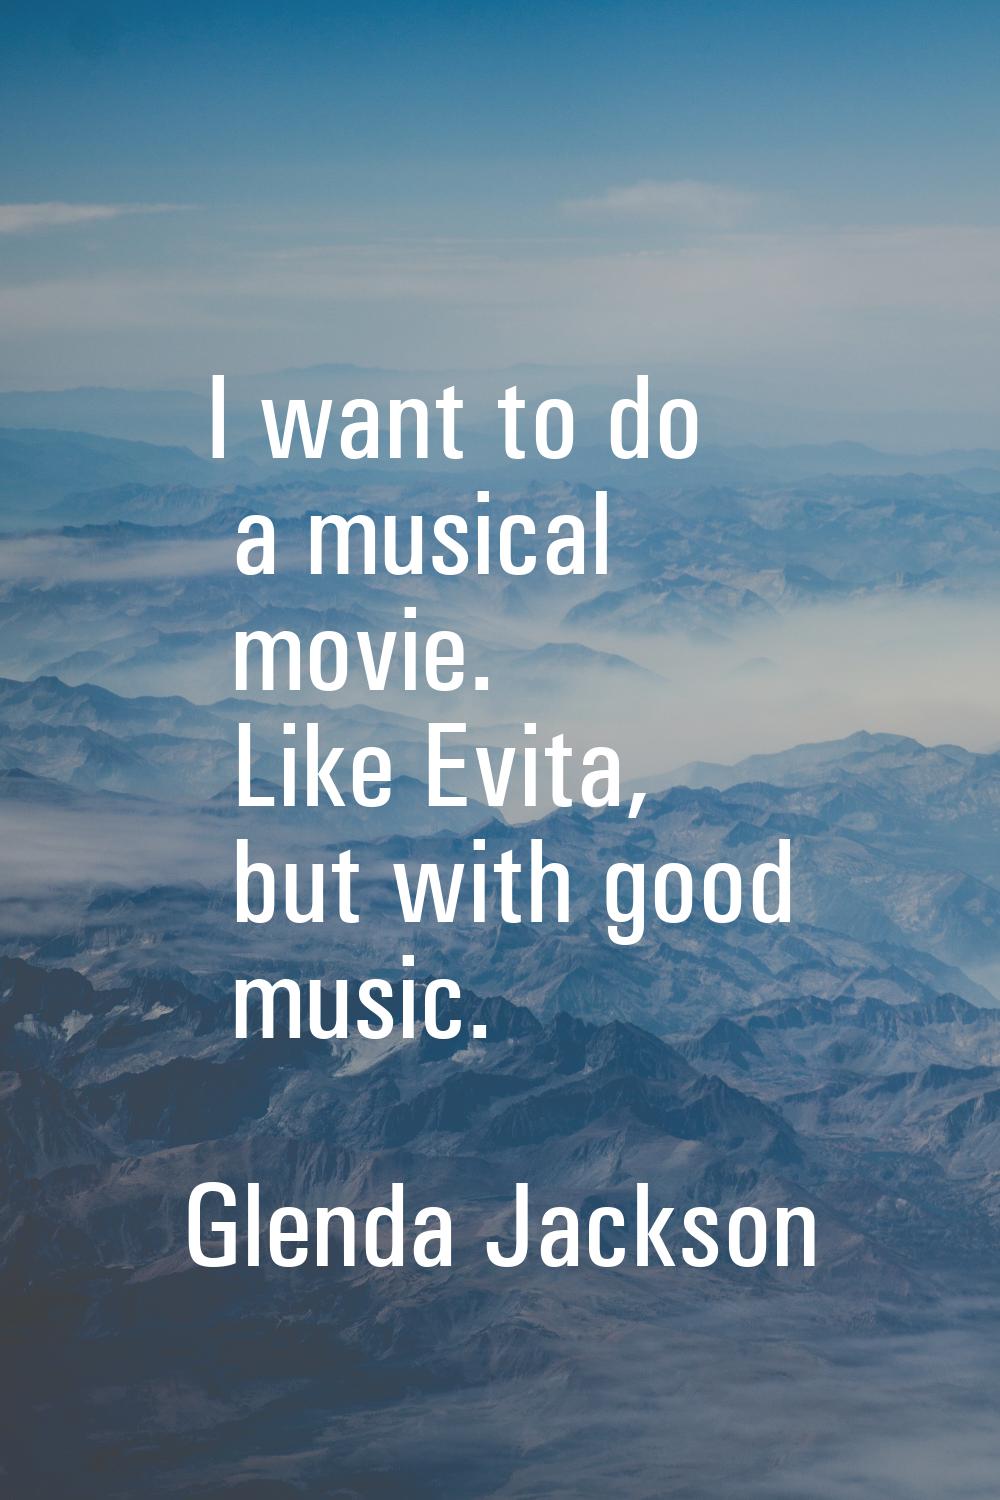 I want to do a musical movie. Like Evita, but with good music.